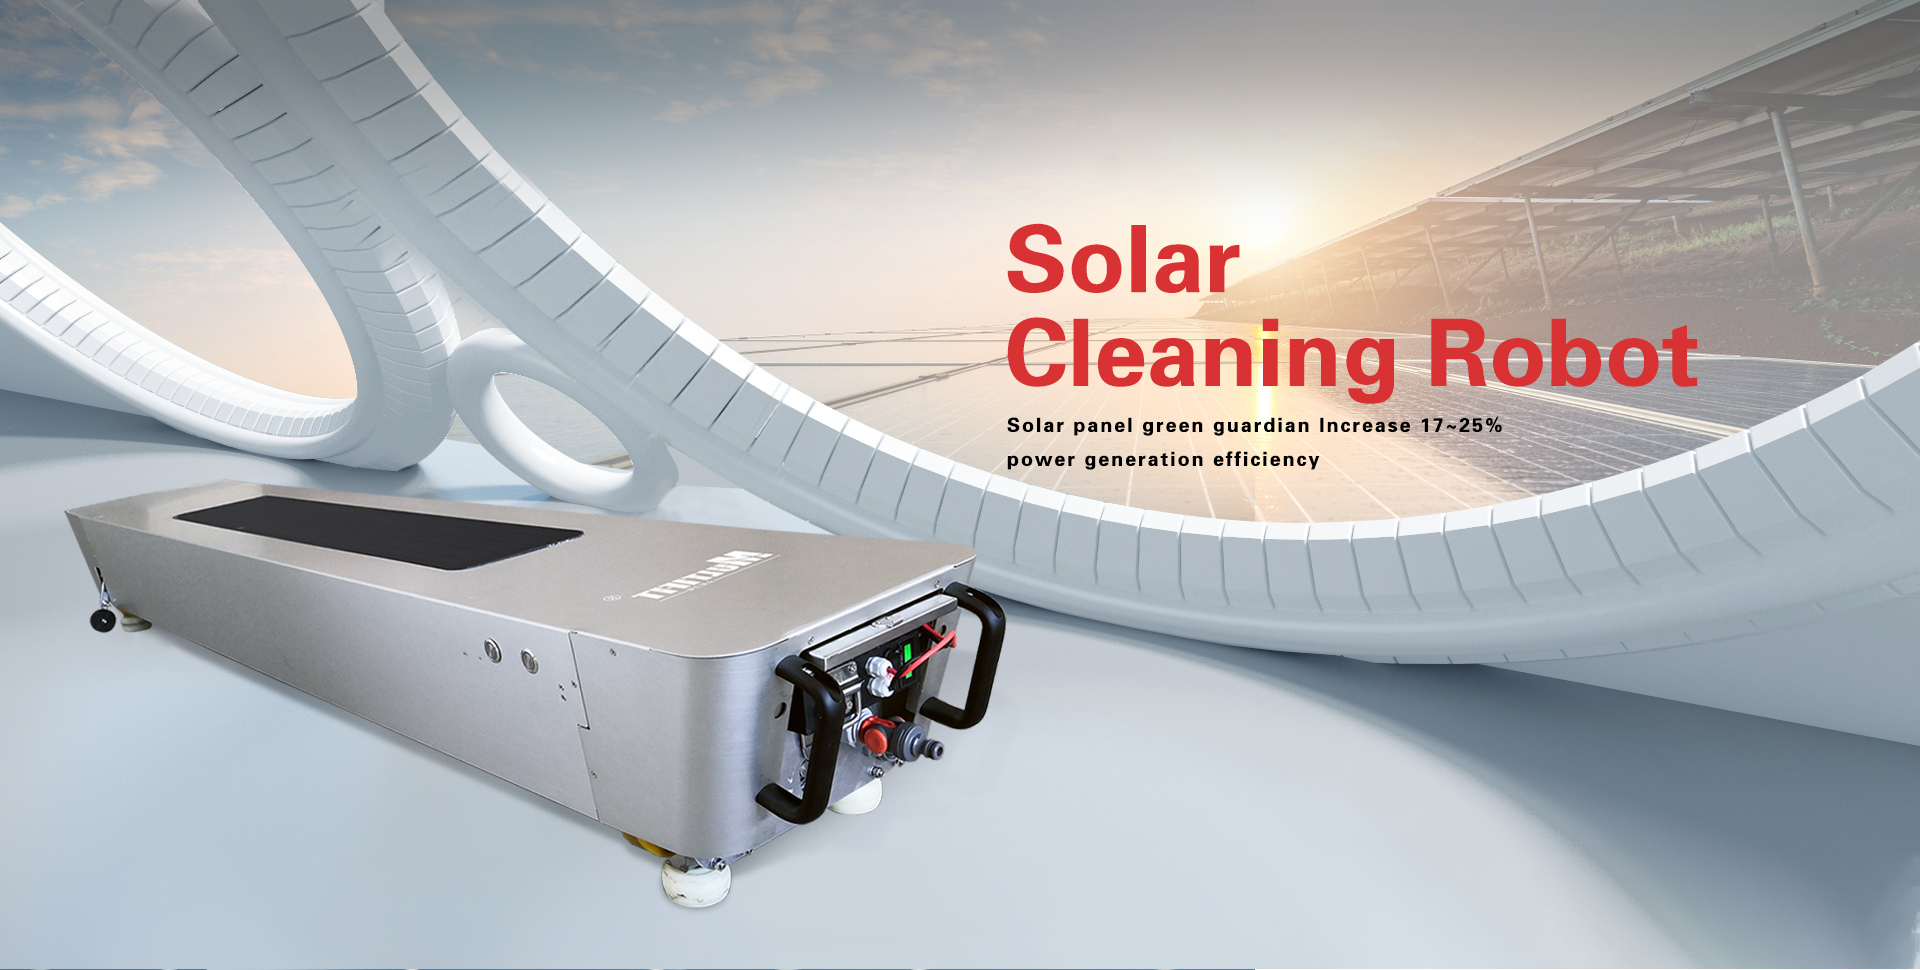 SOLAR CLEANING ROBOT